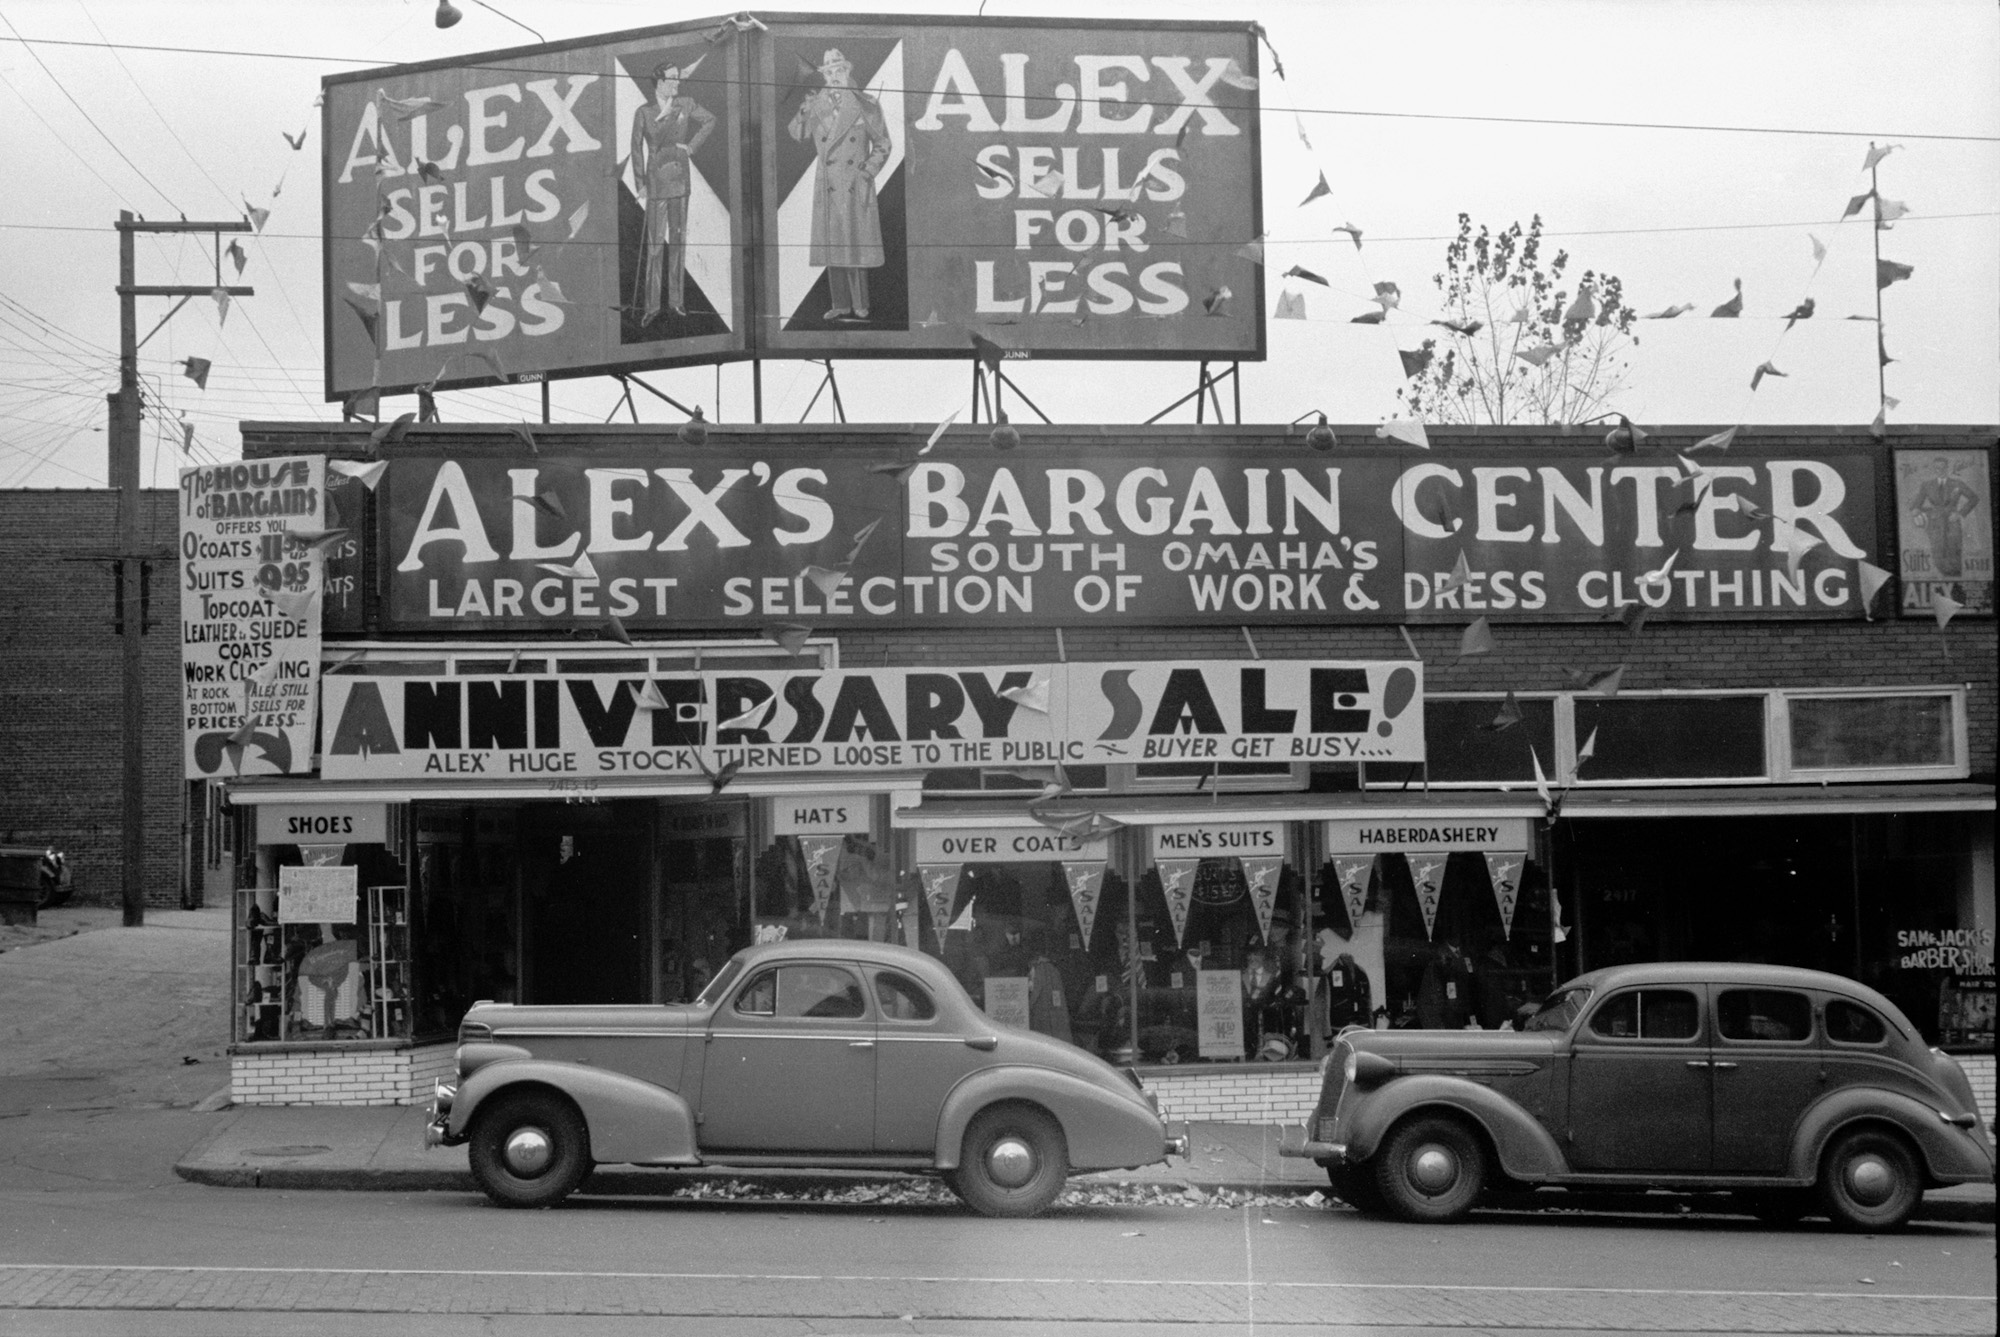 "Alex's Bargain Center, South Omaha's Largest Selection of Work and Dress Clothing." Store in Omaha, Nebraska catering to farmers. November, 1938. View full size.